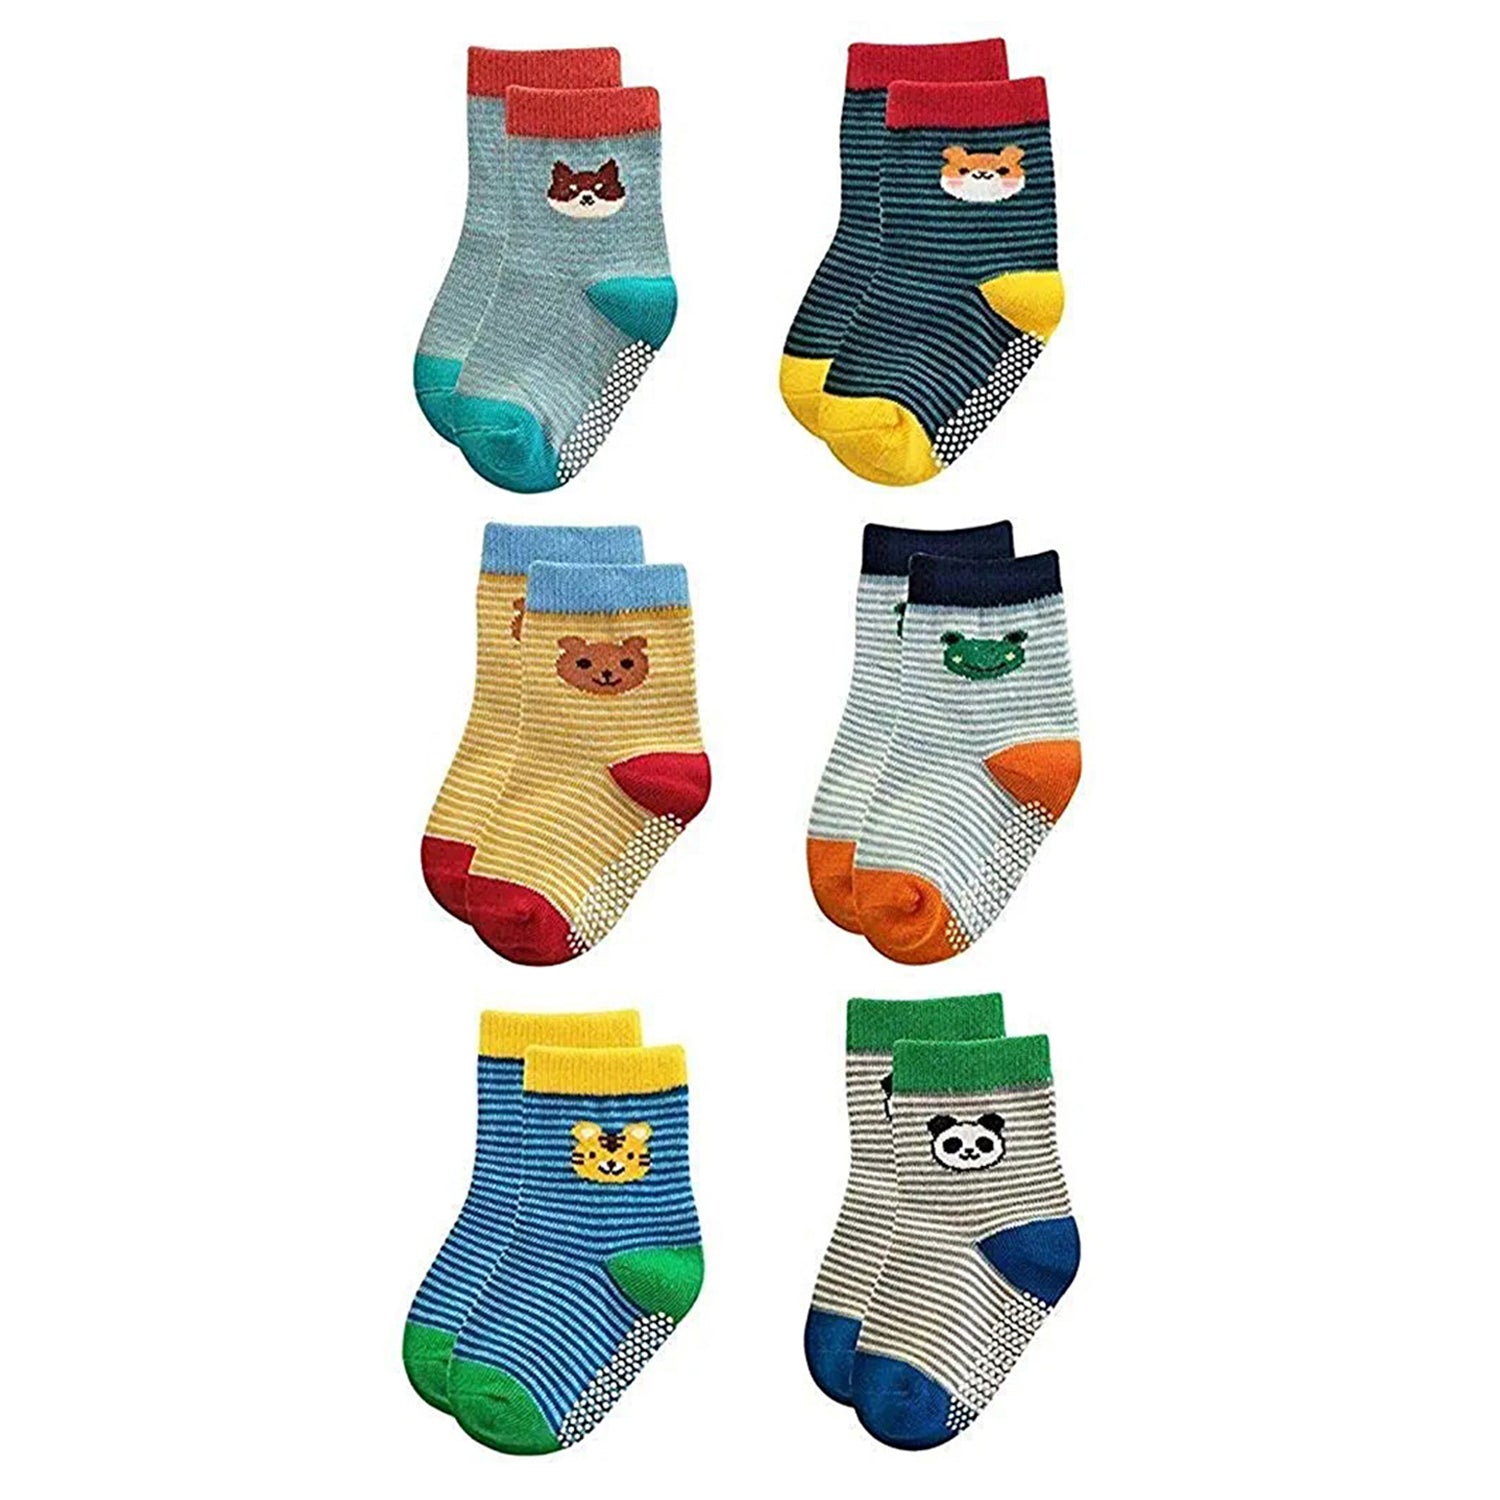 FOOTPRINTS Baby's Organic Cotton Anti-Skid Socks (Multicolour, Mix Designs) - Pack of Any 6 Pairs